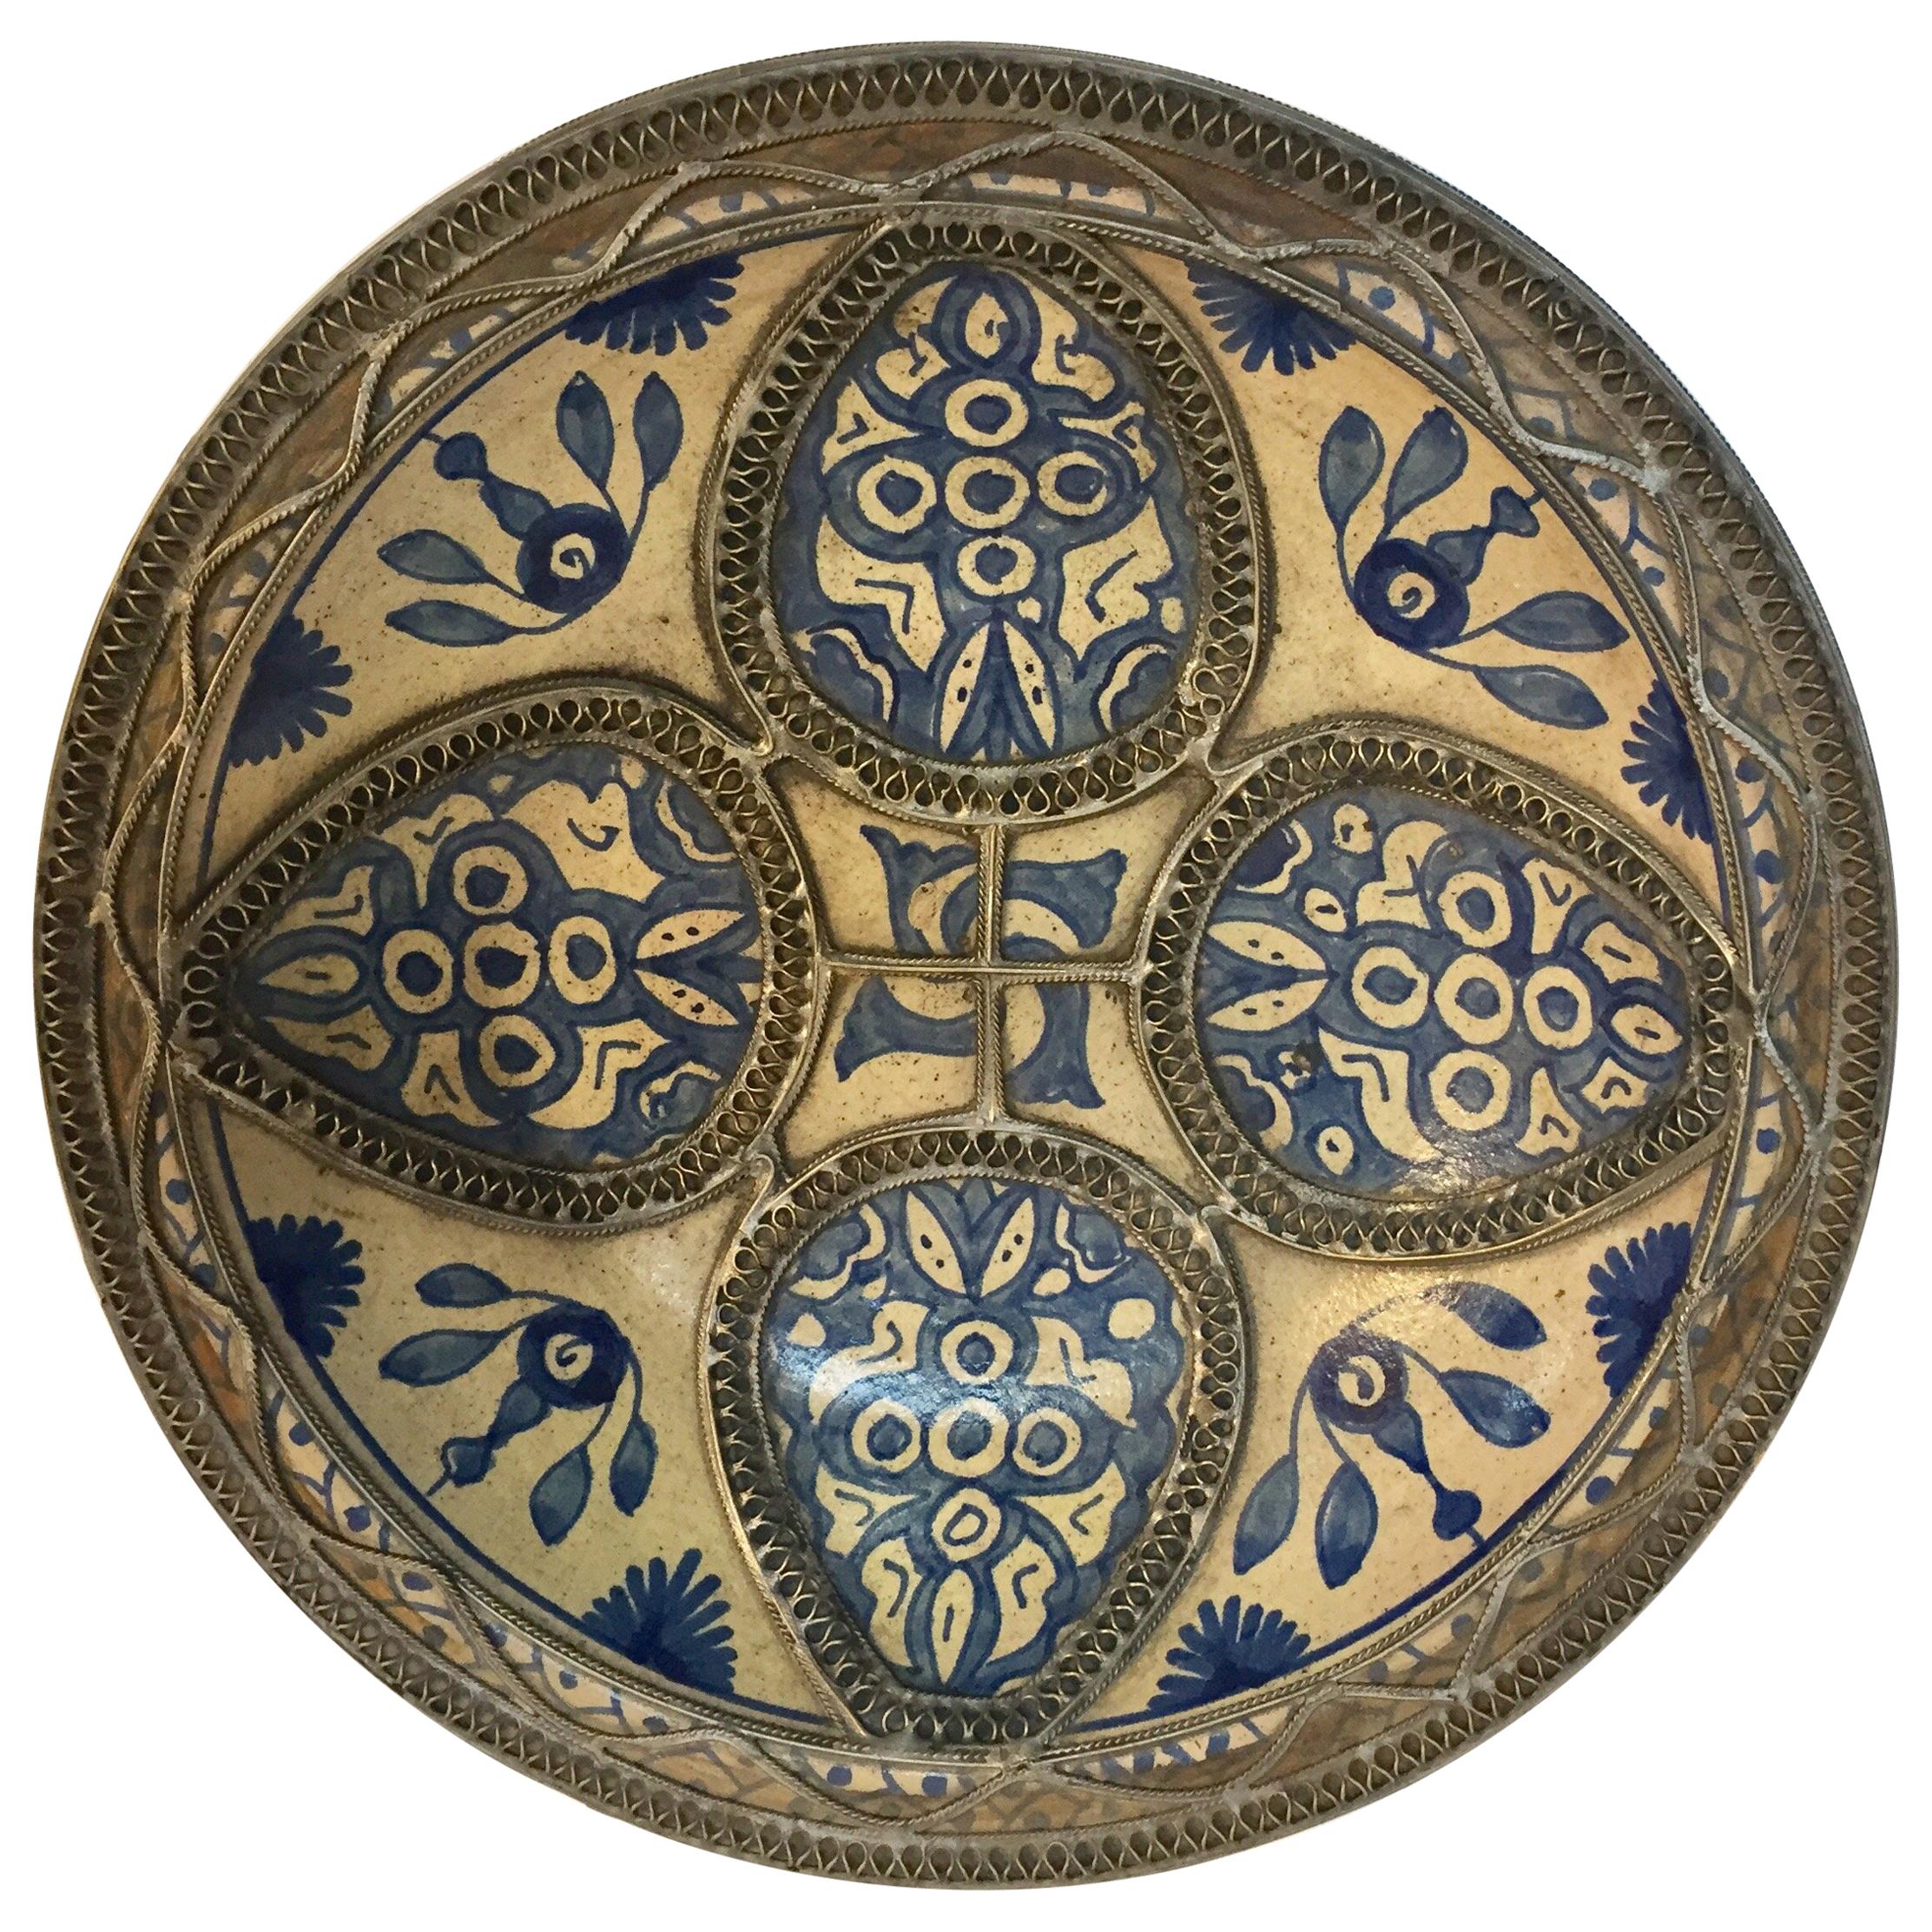 Moroccan Ceramic Plate Adorned with Silver Filigree from Fez